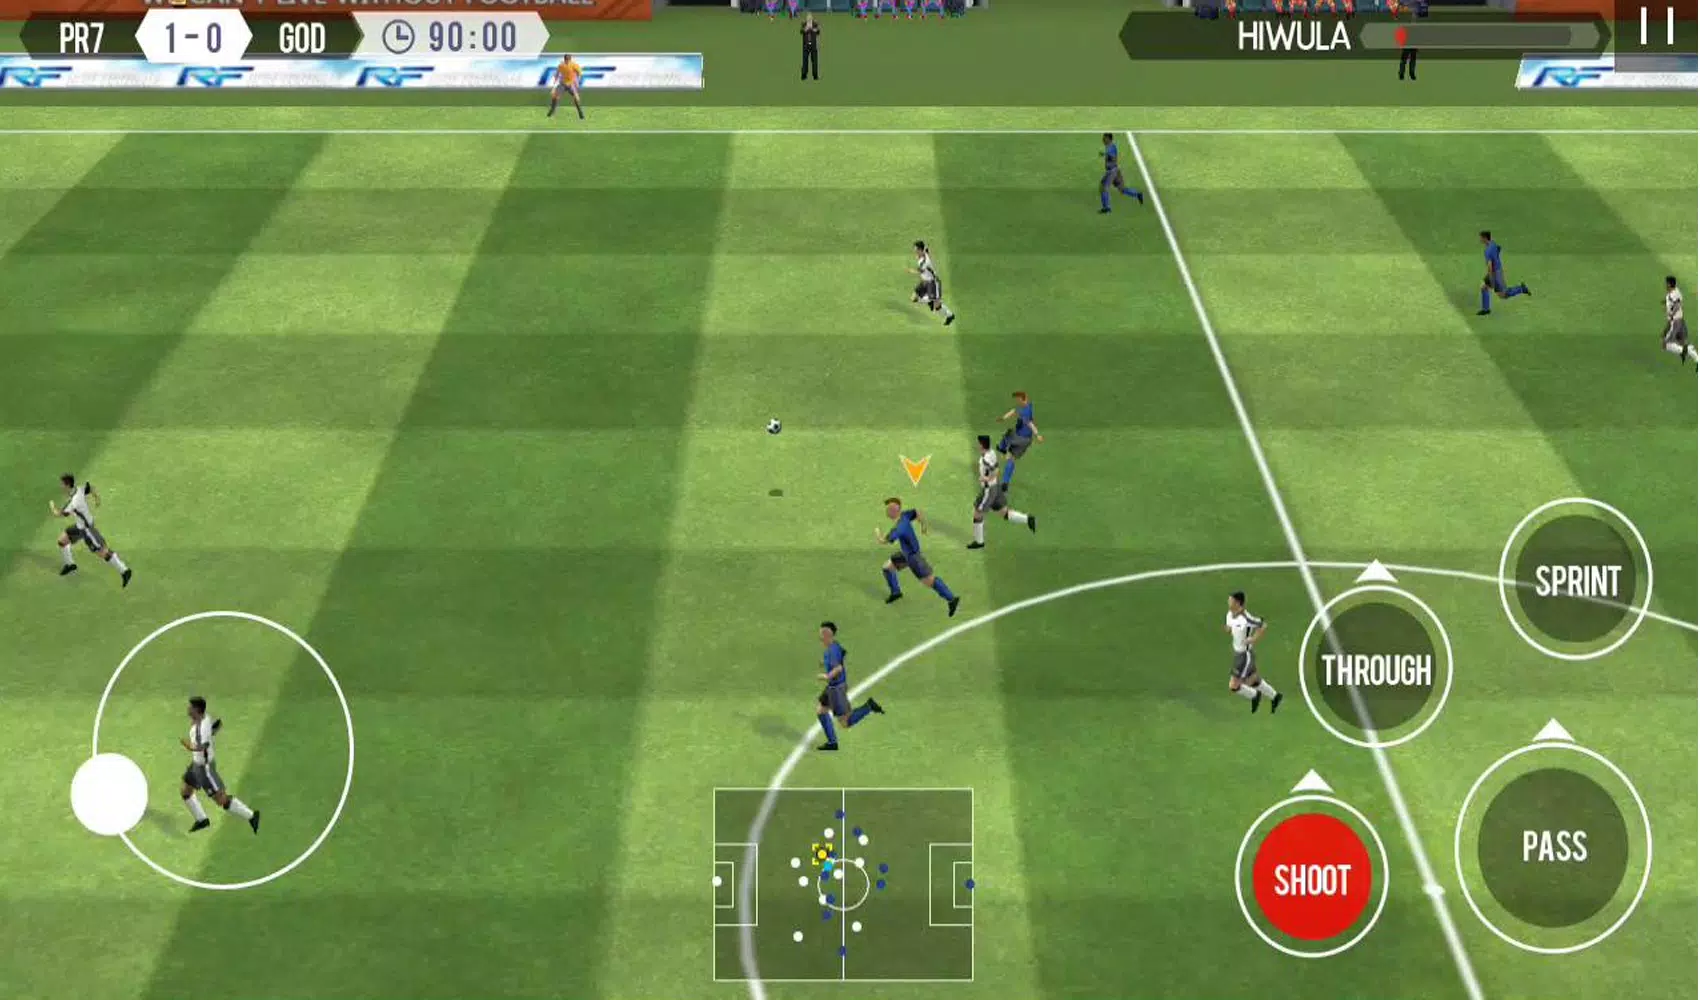 Download FIFA Soccer: FIFA World Cup APK - For Android/iOS